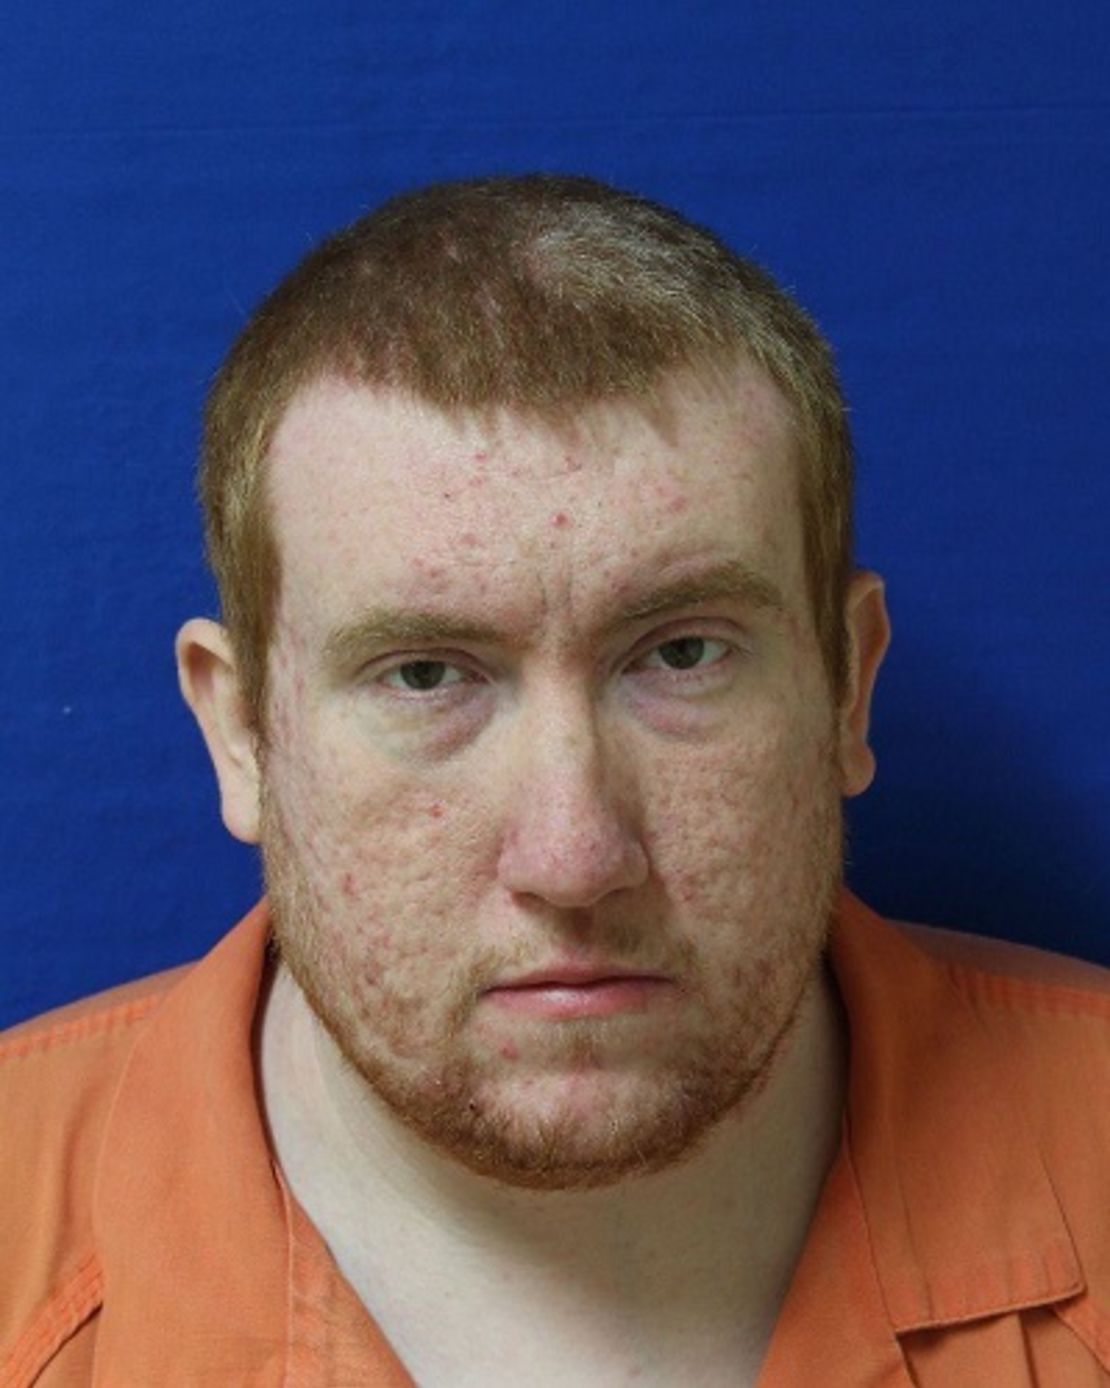 Joseph Daniels, 28, faces homicde charges in his son's death.